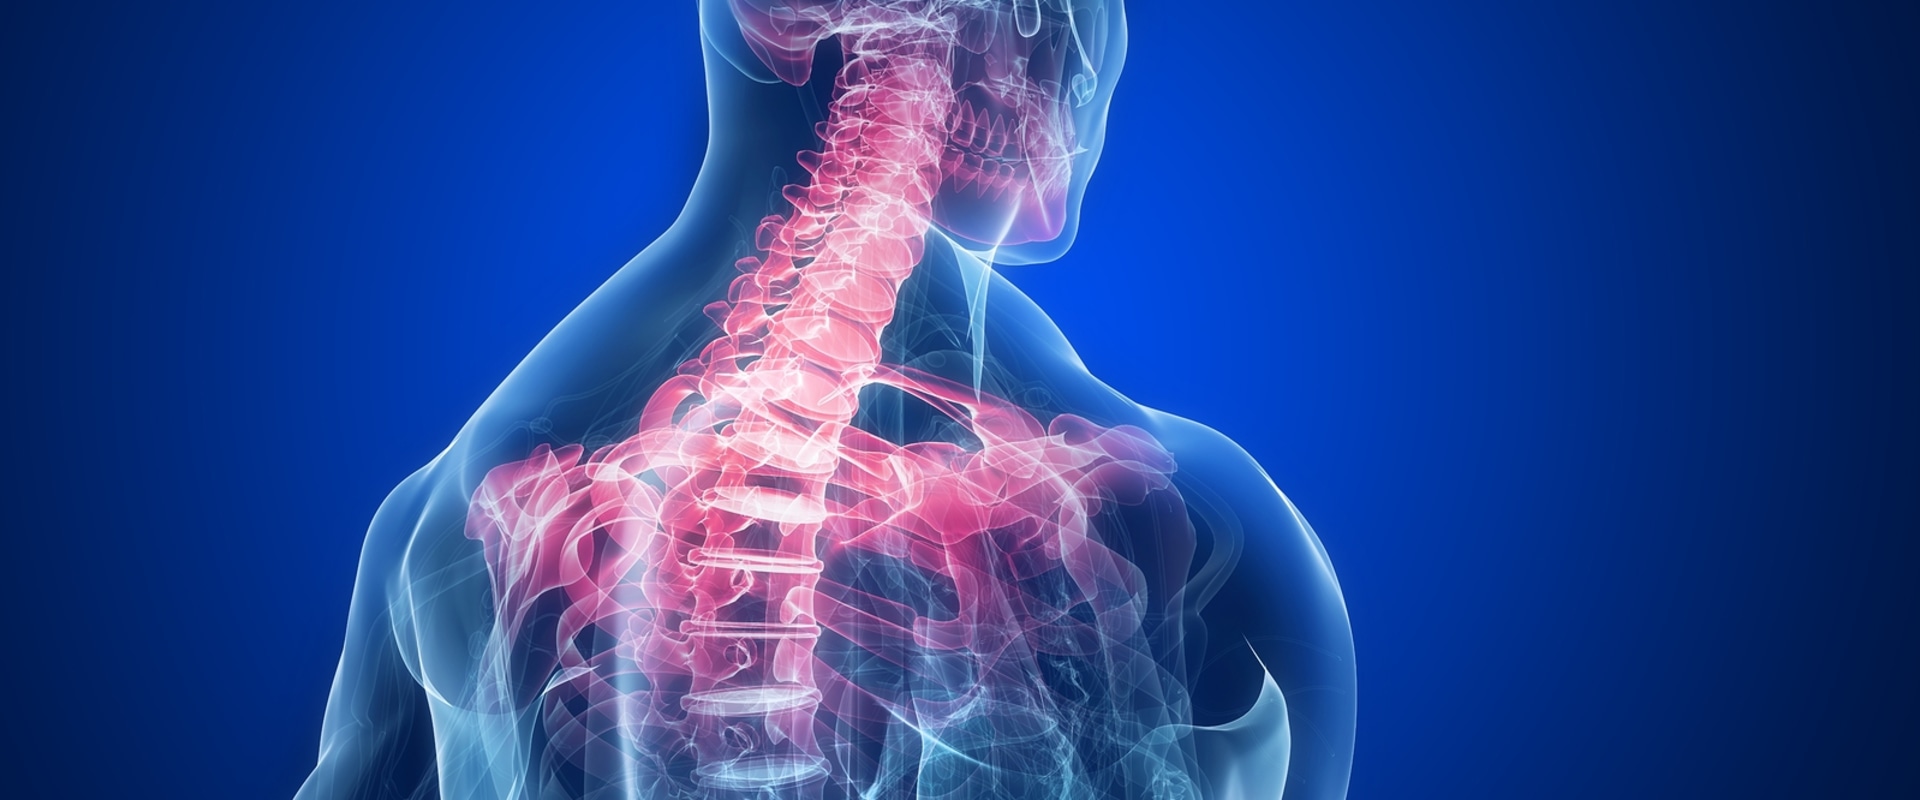 Can chiropractor cause nerve damage?